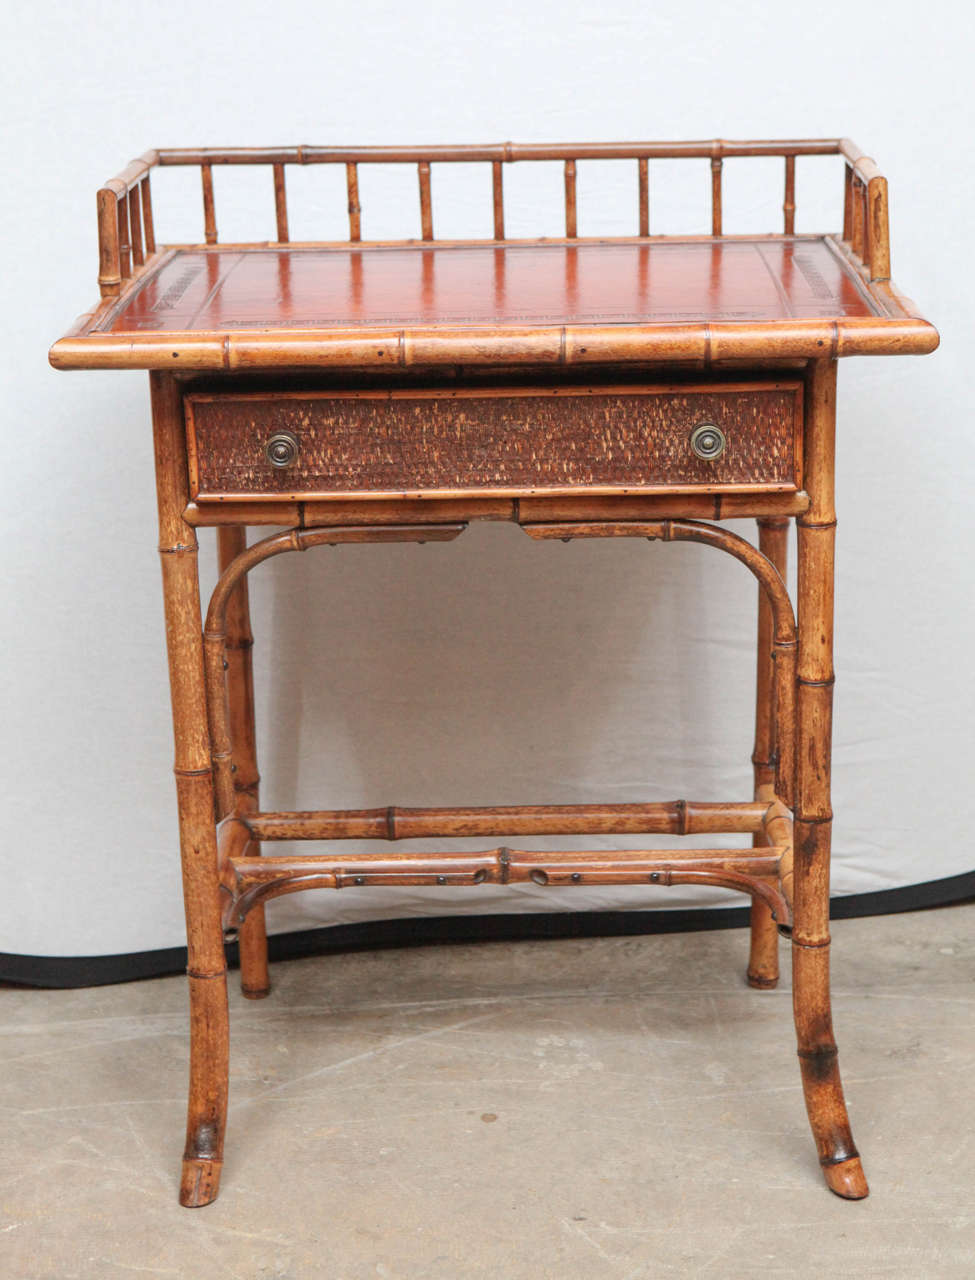 19th century English bamboo writing table with single drawer and tooled leather top. Can also be used as nightstand or end table.